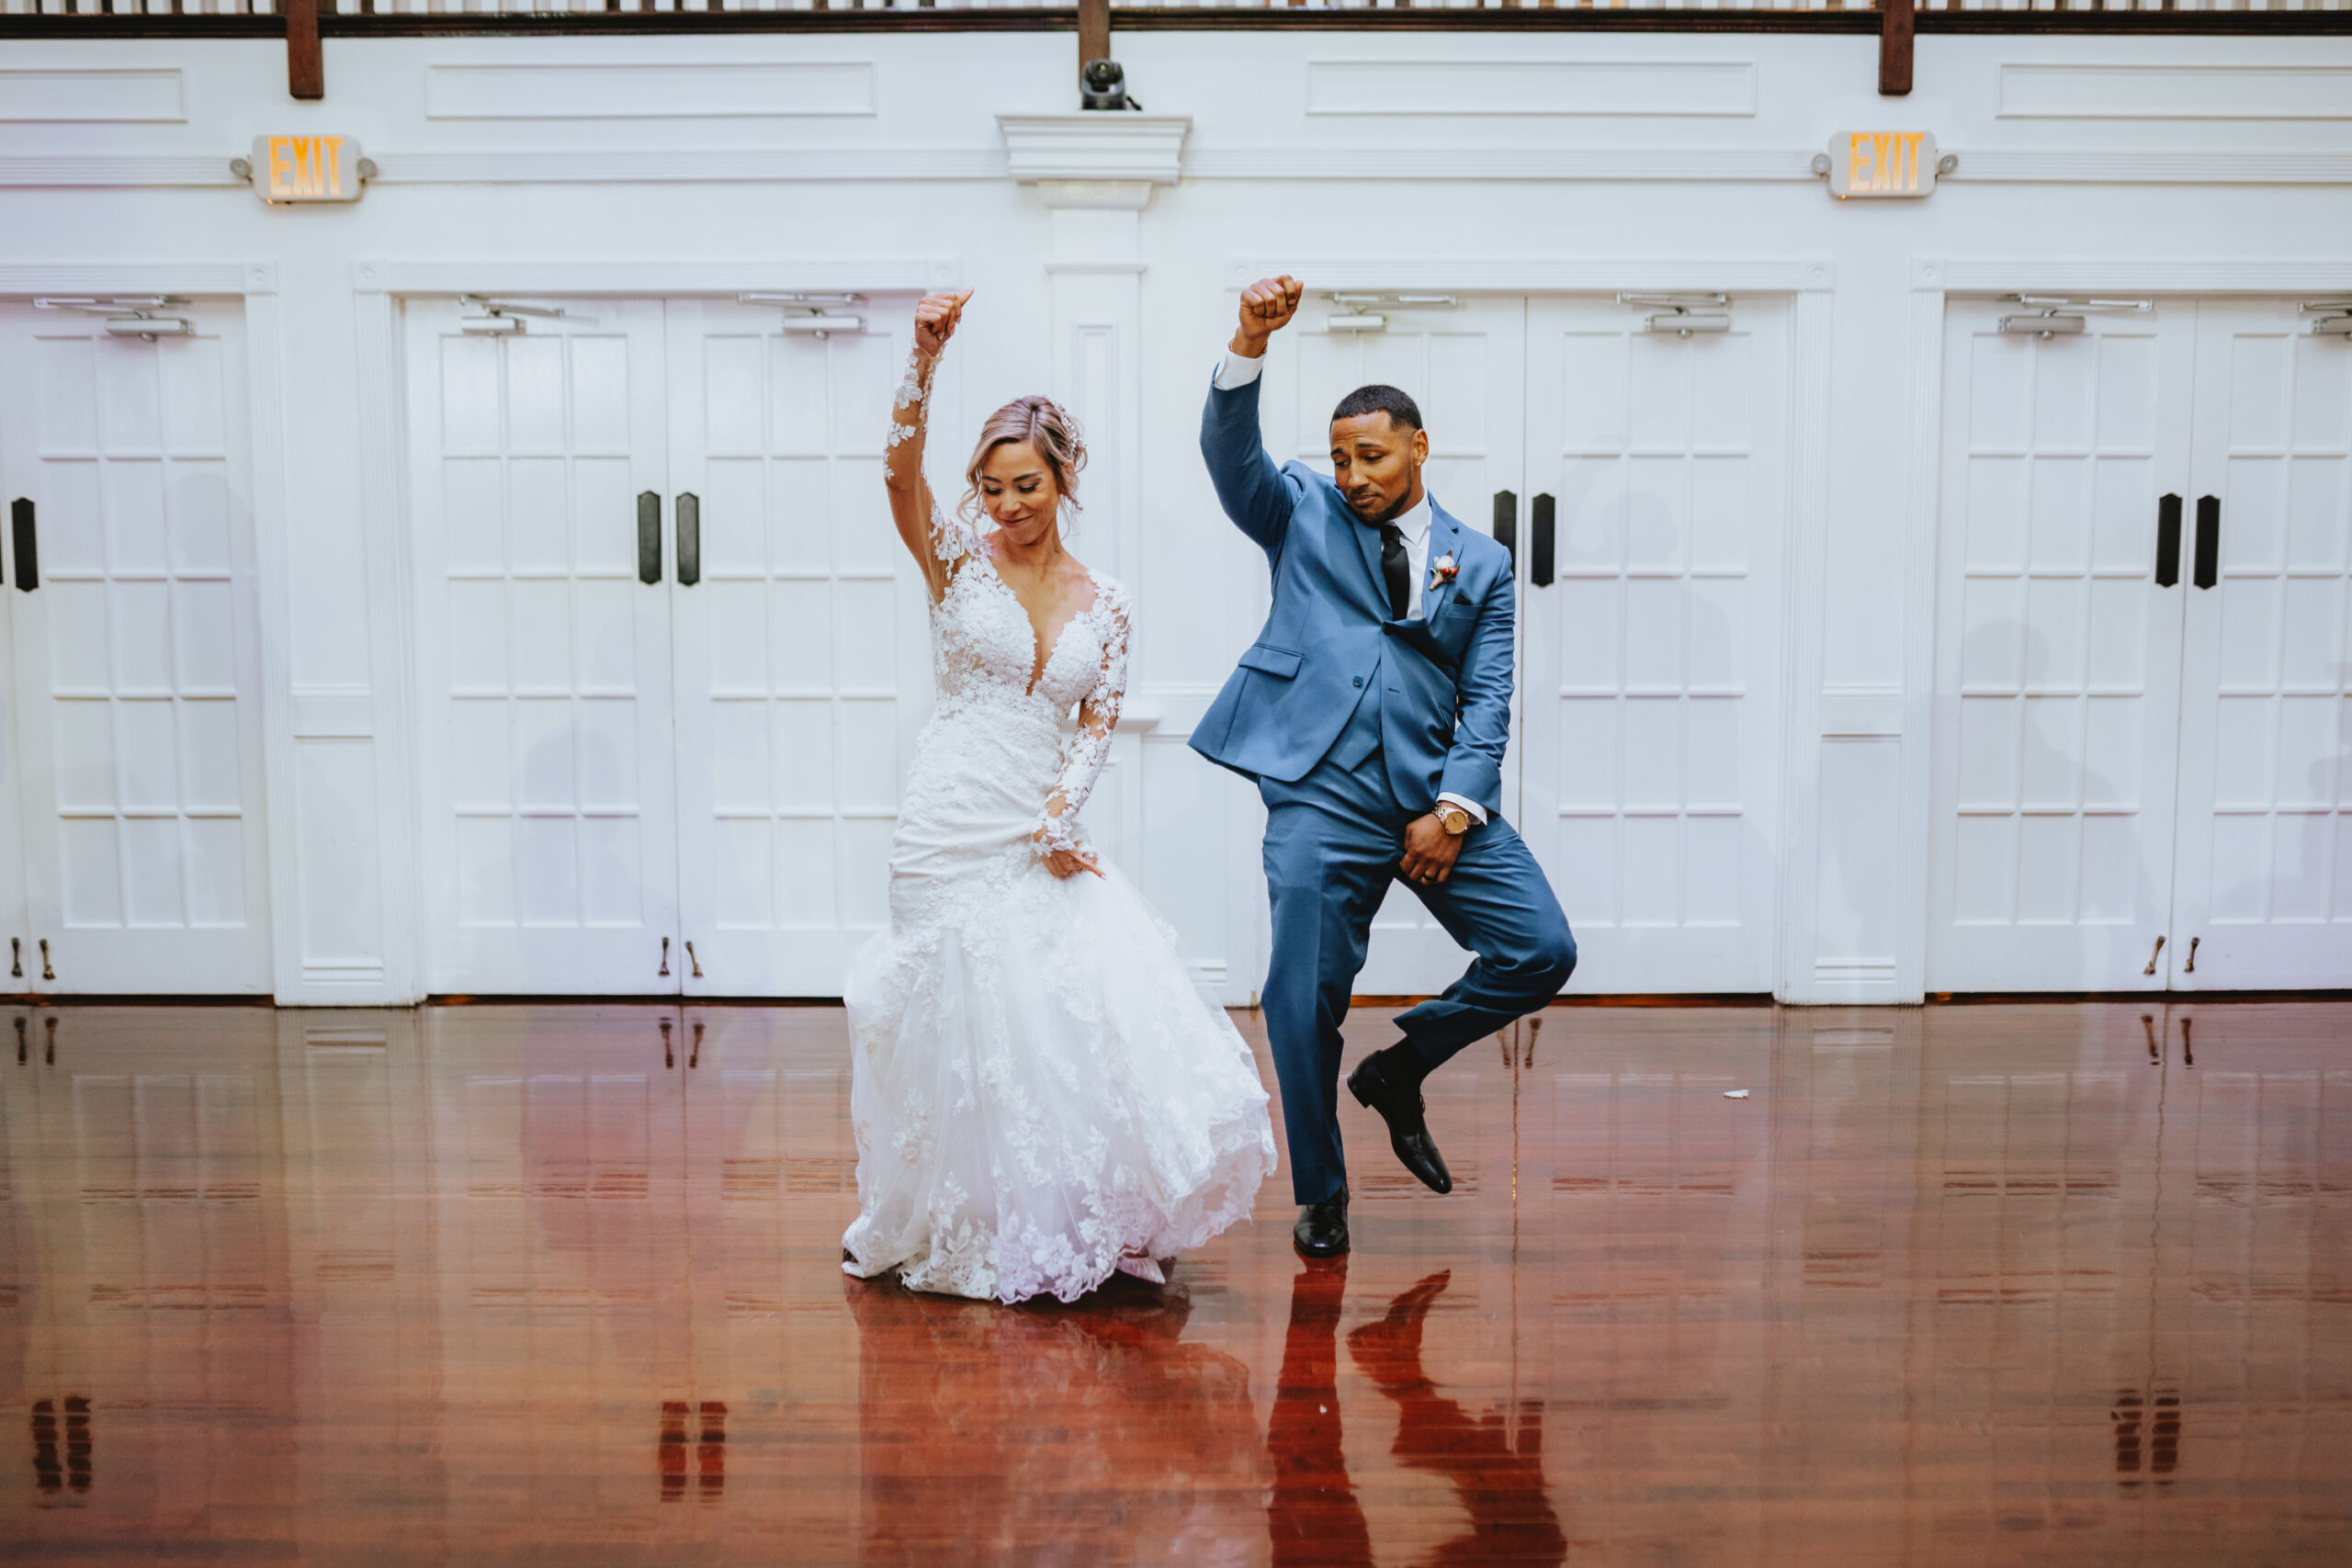 The bride and groom shuffle into reception during their entrain dance with one hand in the air at Hamilton Manor.